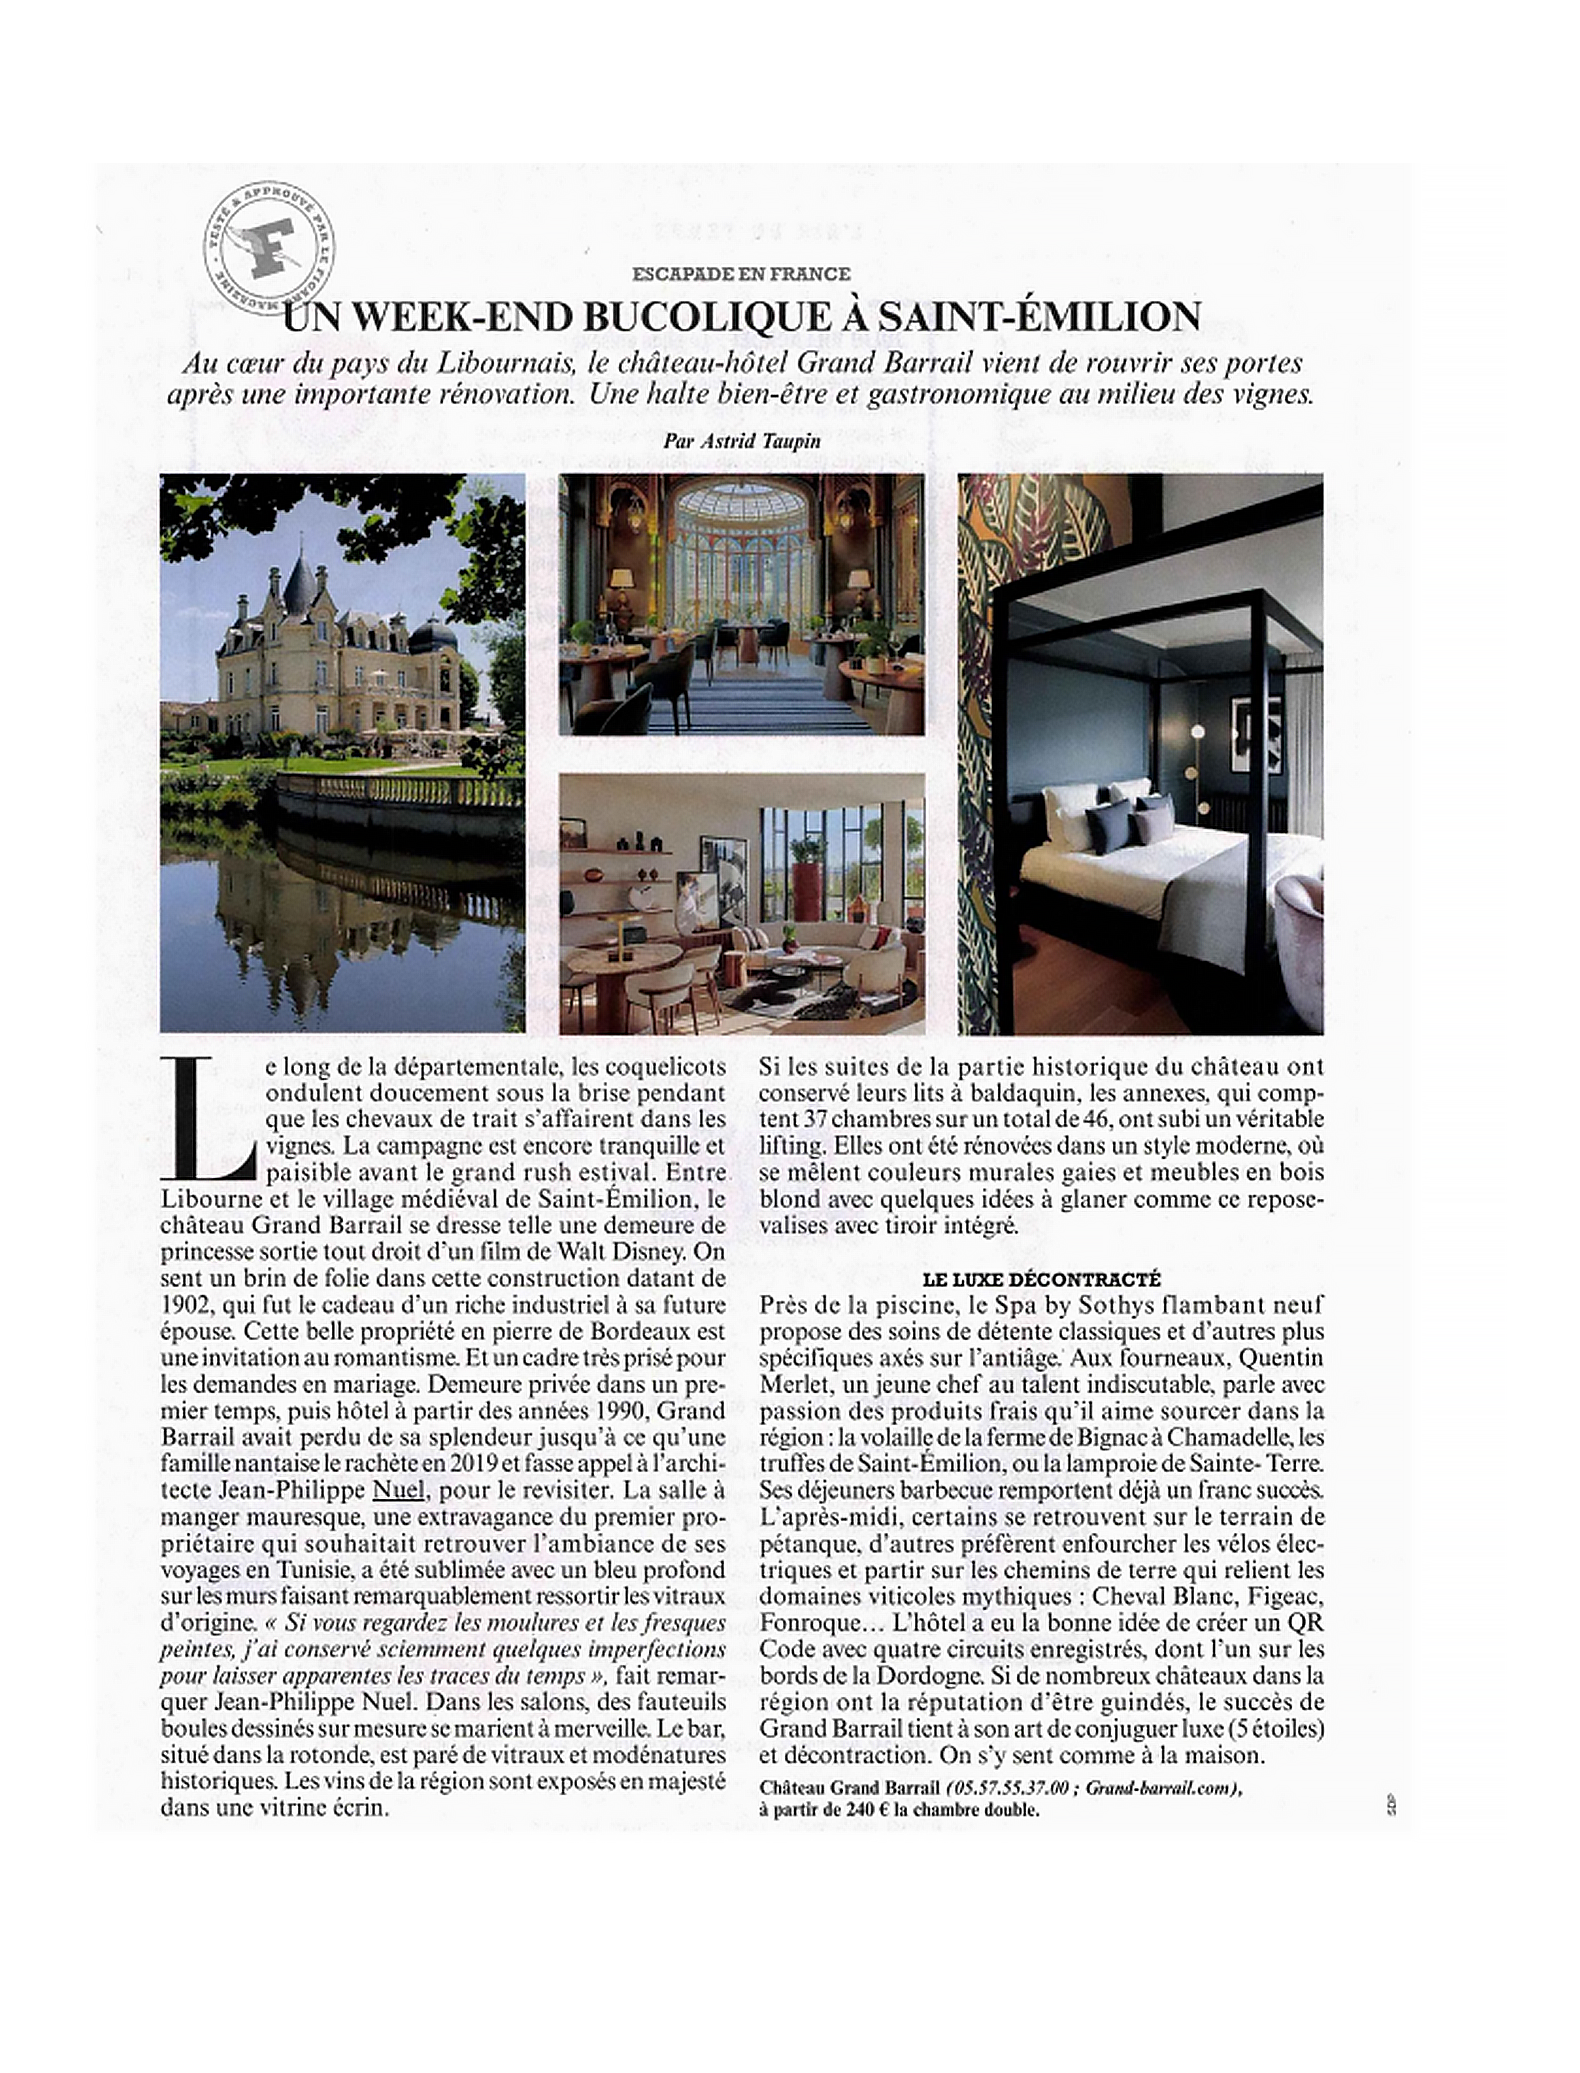 article from the figaro magazine about tthe Château-hôtel Grand Barrail